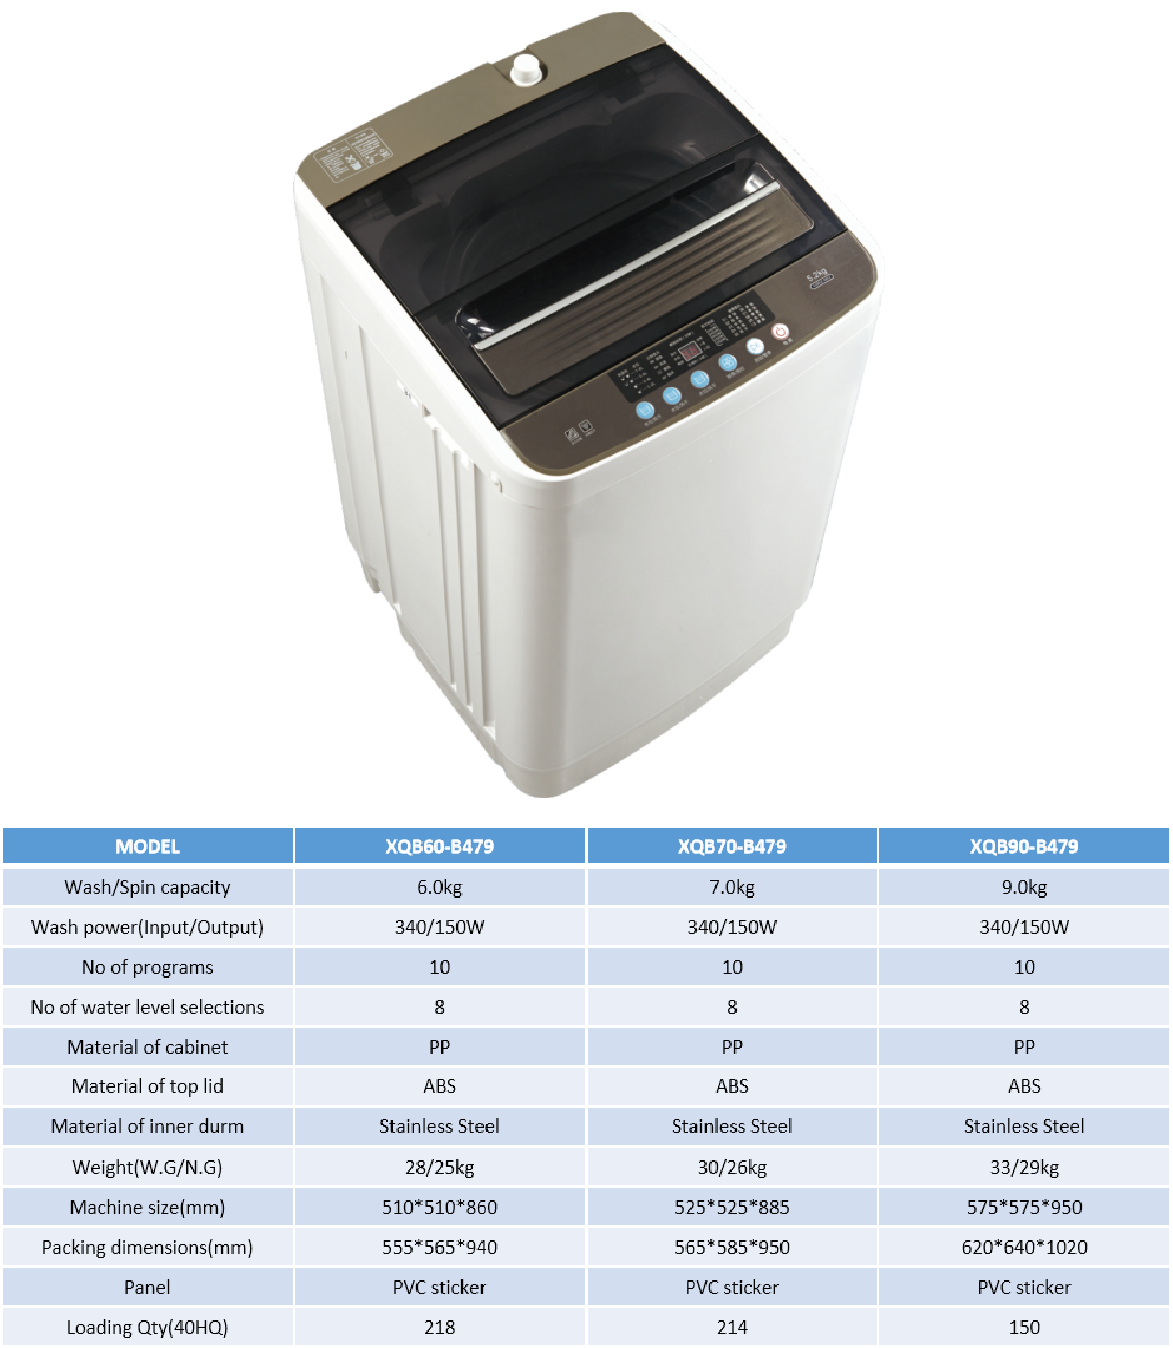 Top loading washer